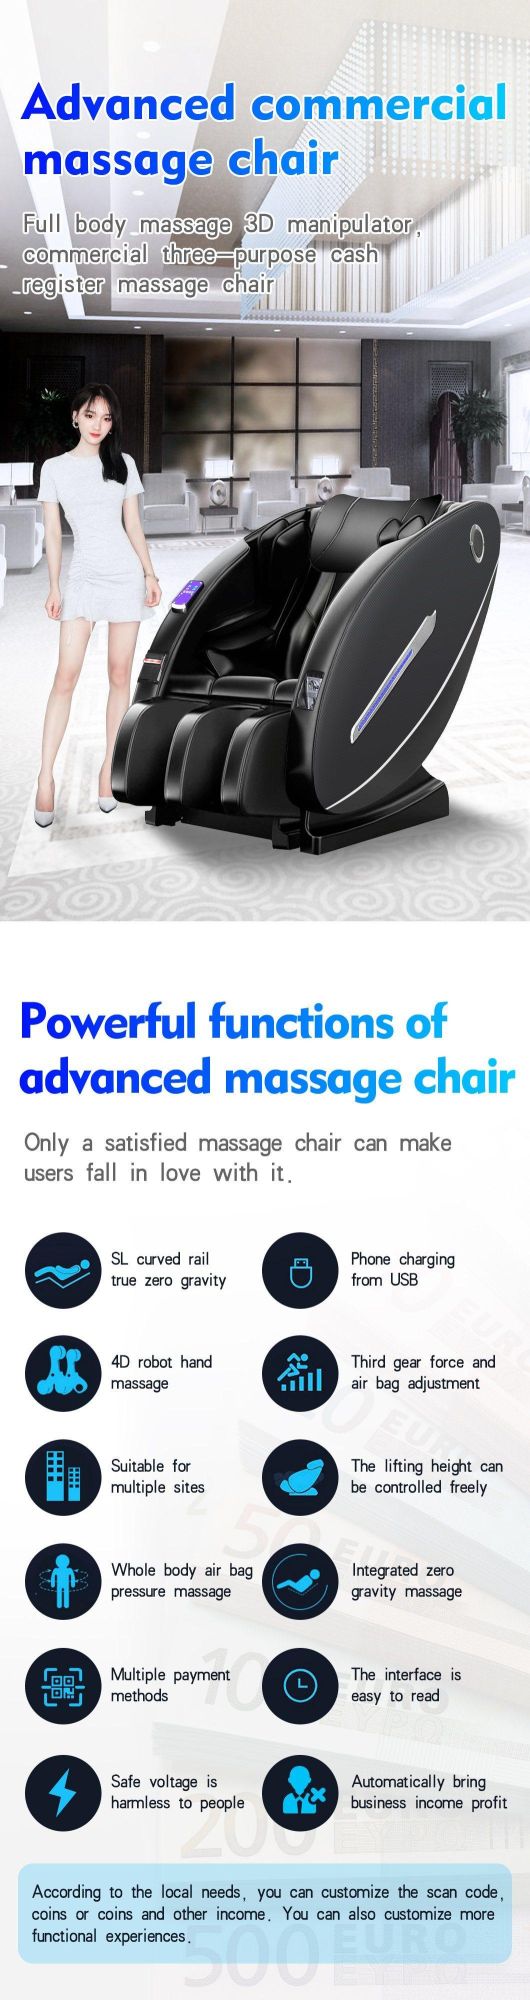 Wholesale Hot Selling Cheap Bill Operated Vending Massage Chair for Commercial